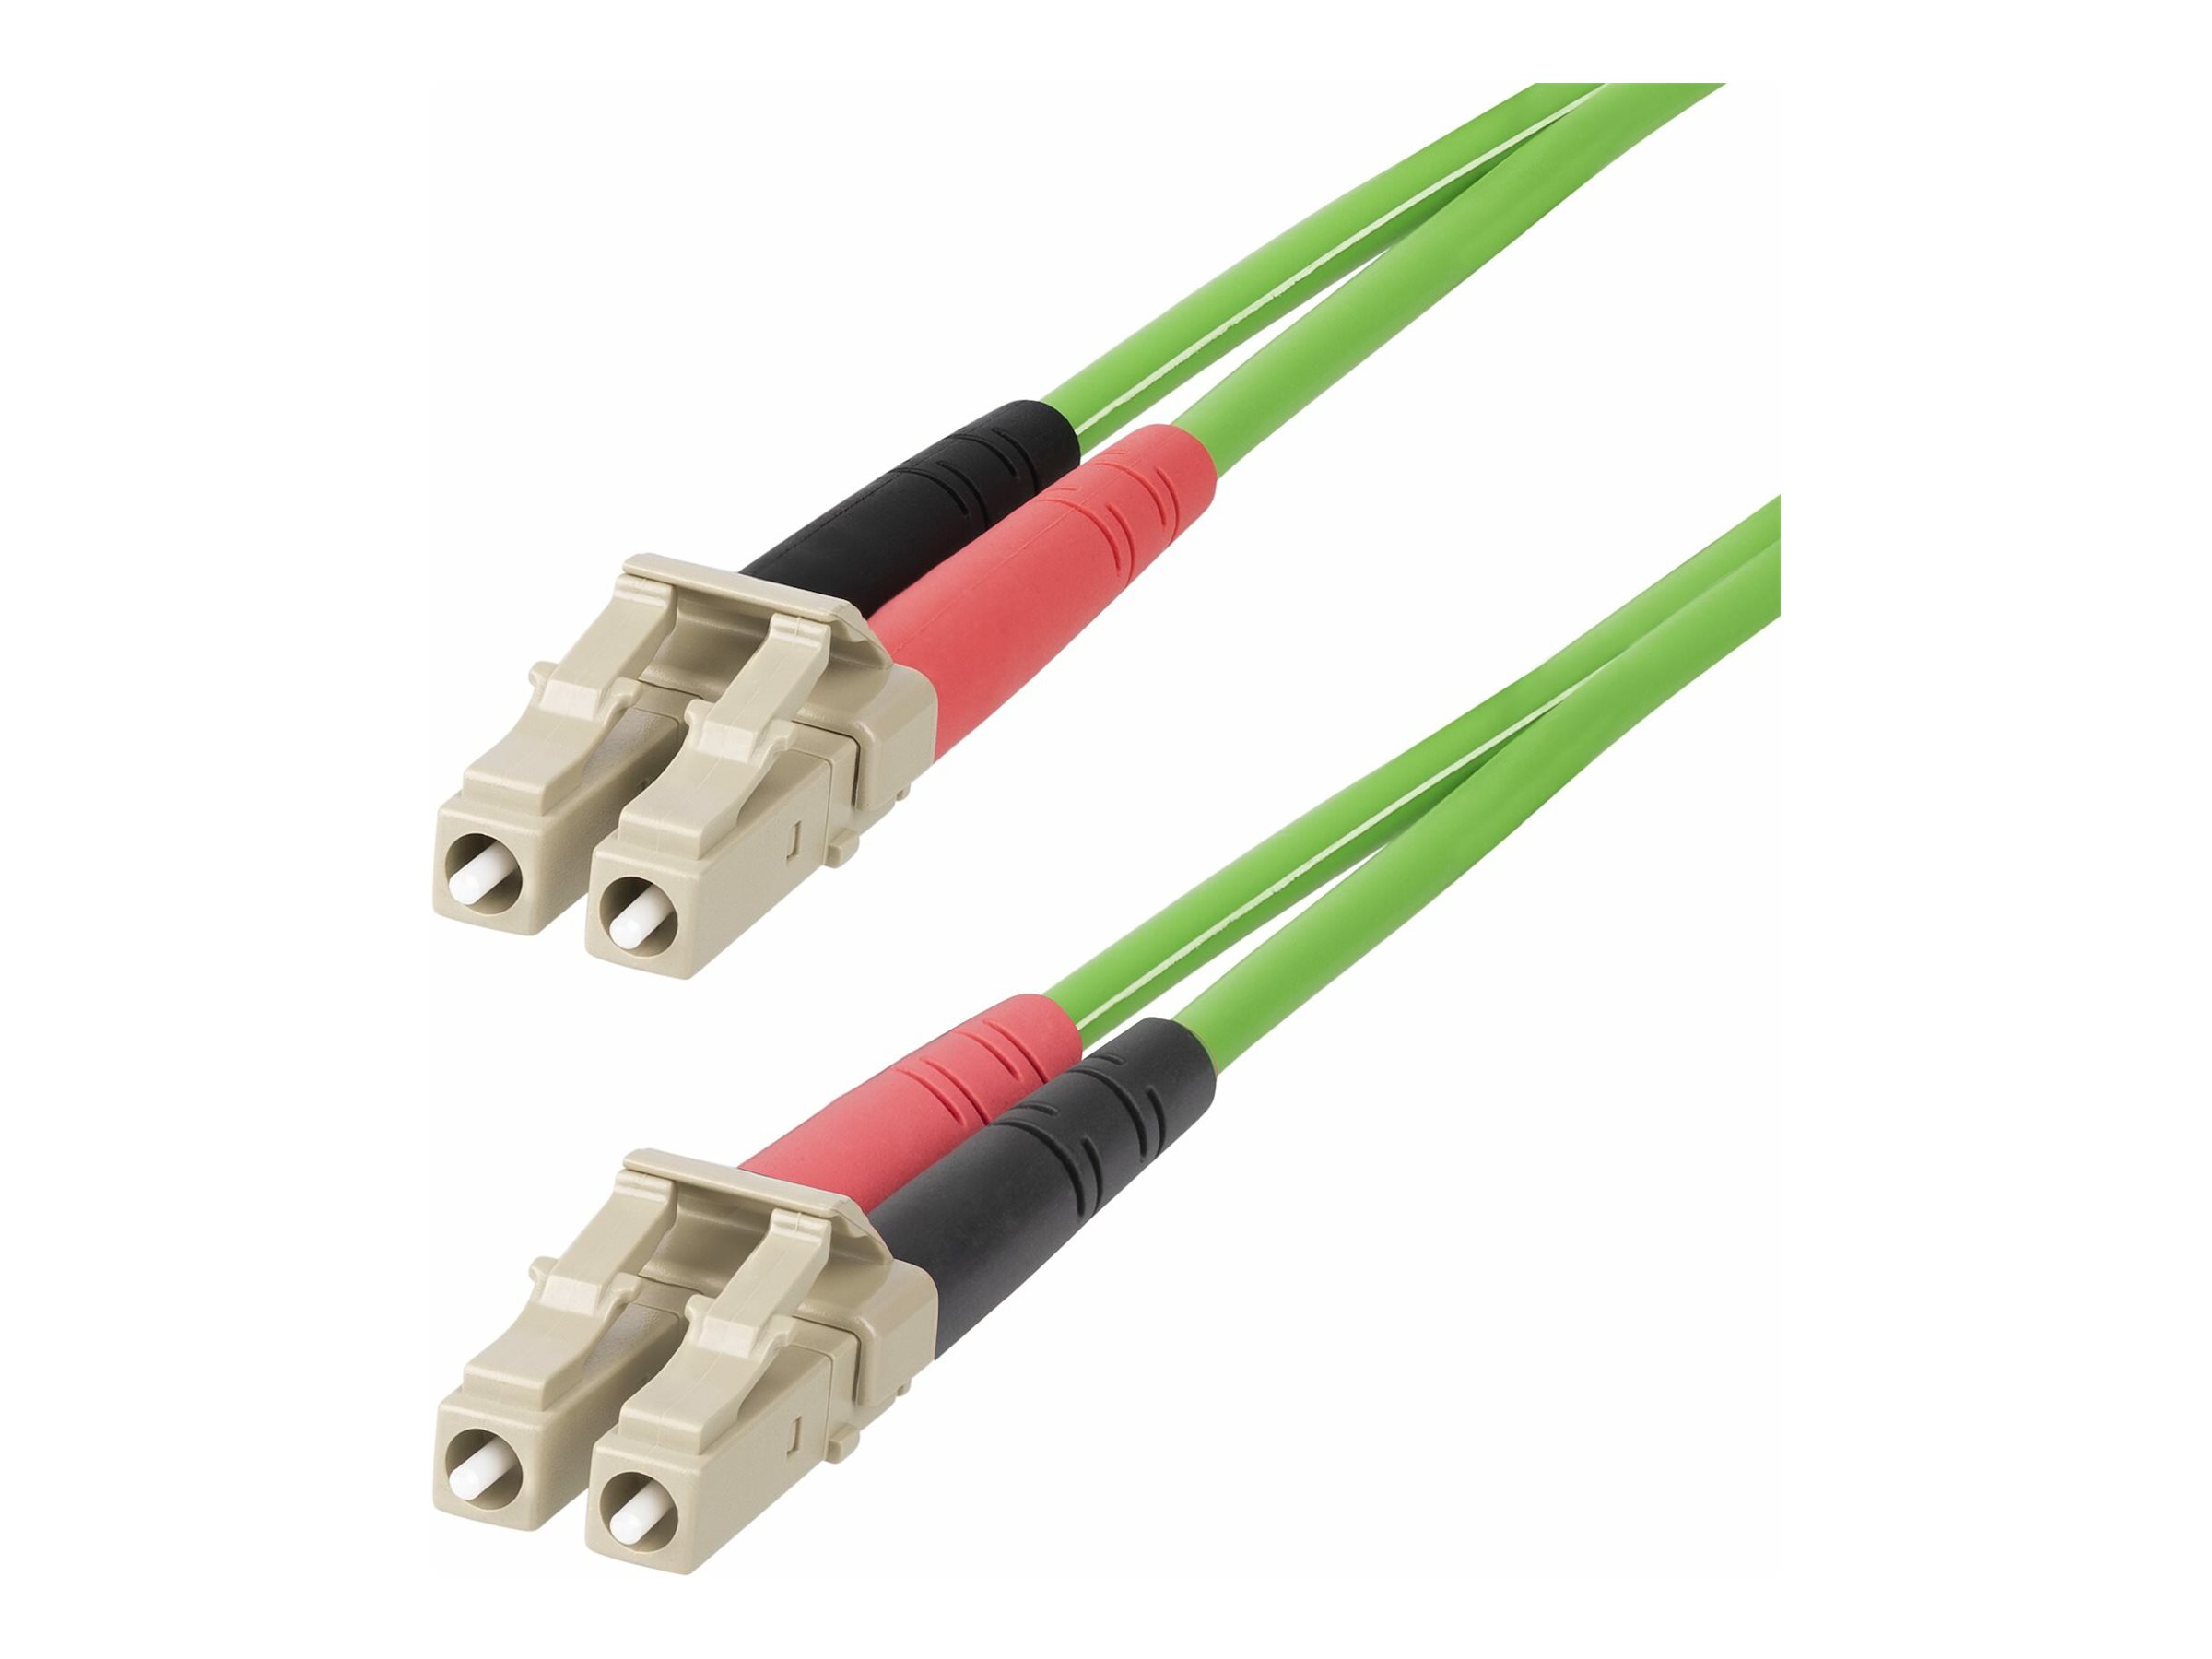 StarTech.com 2m (6ft) LC to LC (UPC) OM5 Multimode Fiber Optic Cable, 50/125m Duplex LOMMF Zipcord, VCSEL, 40G/100G, Bend Insen